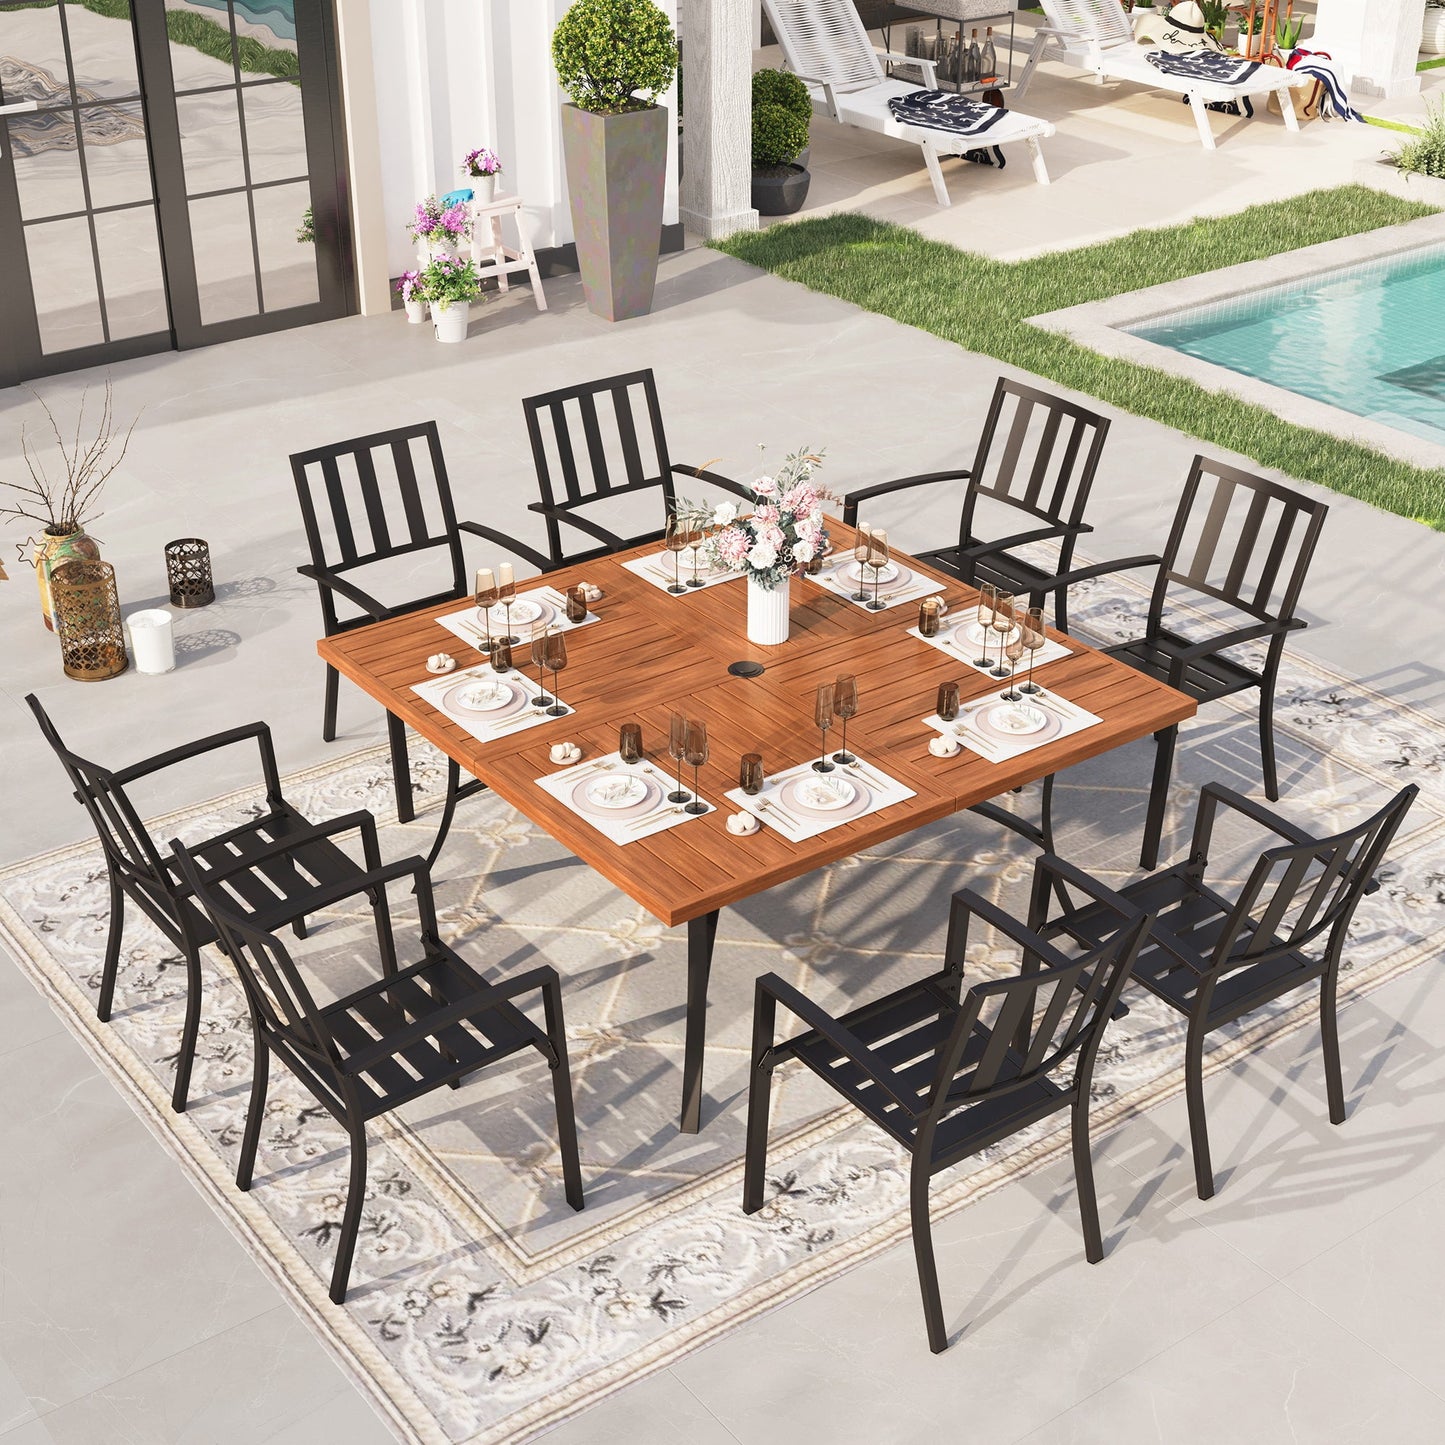 Sophia & William 9 Piece Outdoor Metal Patio Dining Set 60" Teak Wood Square Table and Chairs Furniture Set for 8, Brown